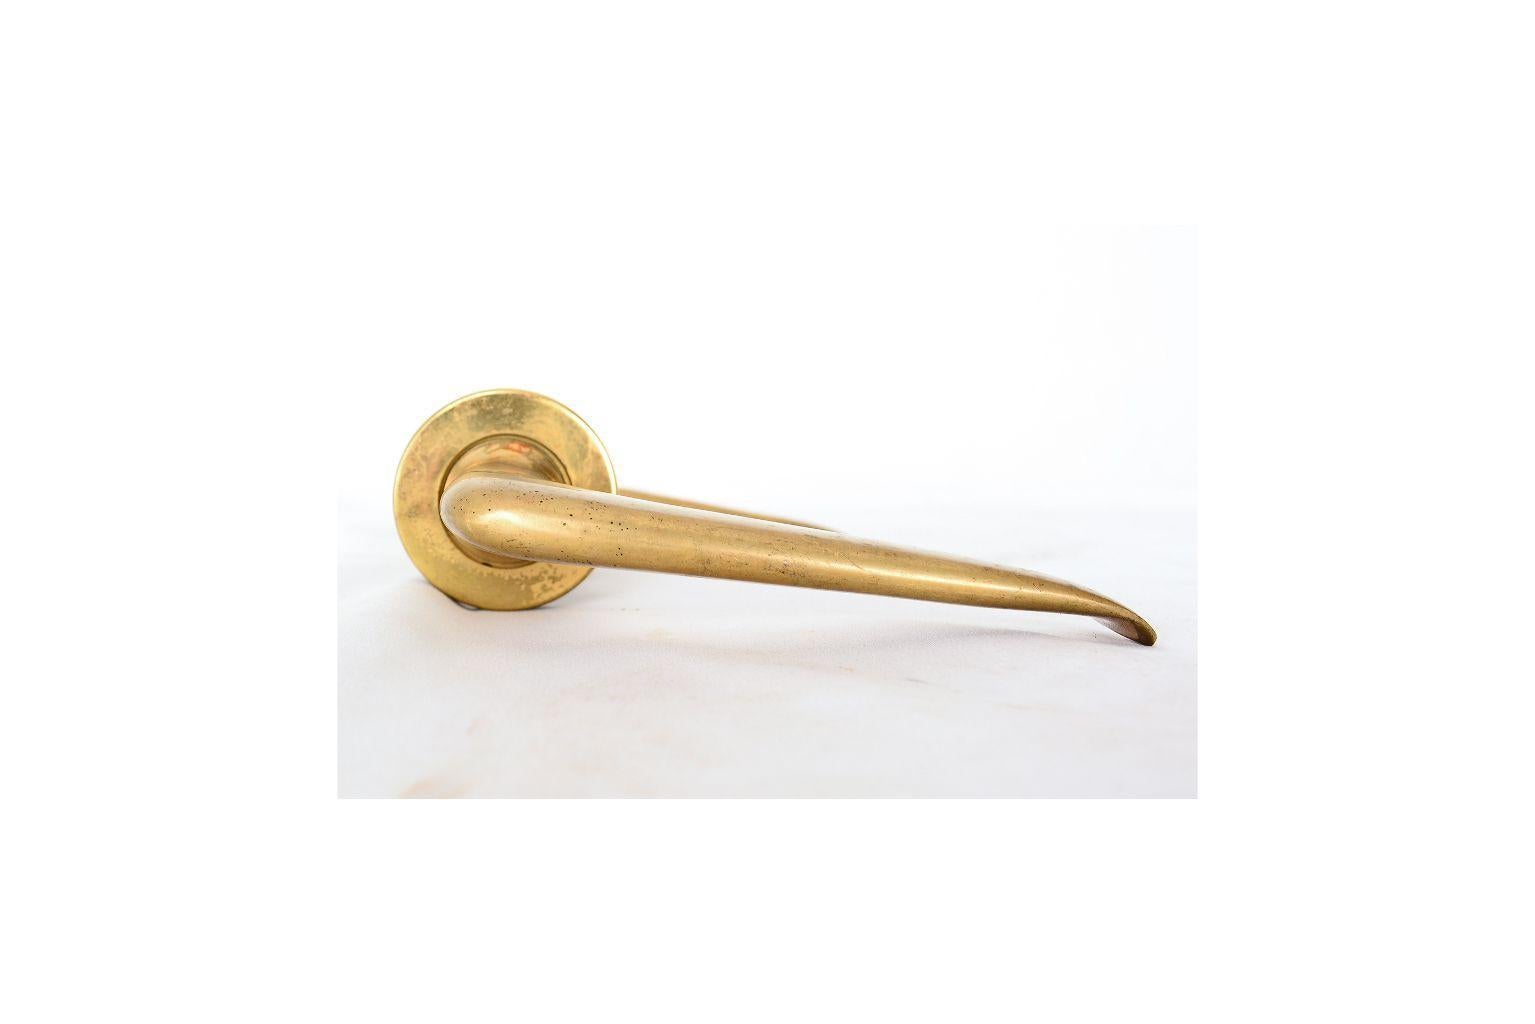 For your consideration: a pair of solid brass door pull handles in a sculptural shape by Gio Ponti.

Beautiful design with clean modern lines. Italy, Mid-Century Modern.

The clever design secures the handle into the frame of the door with three